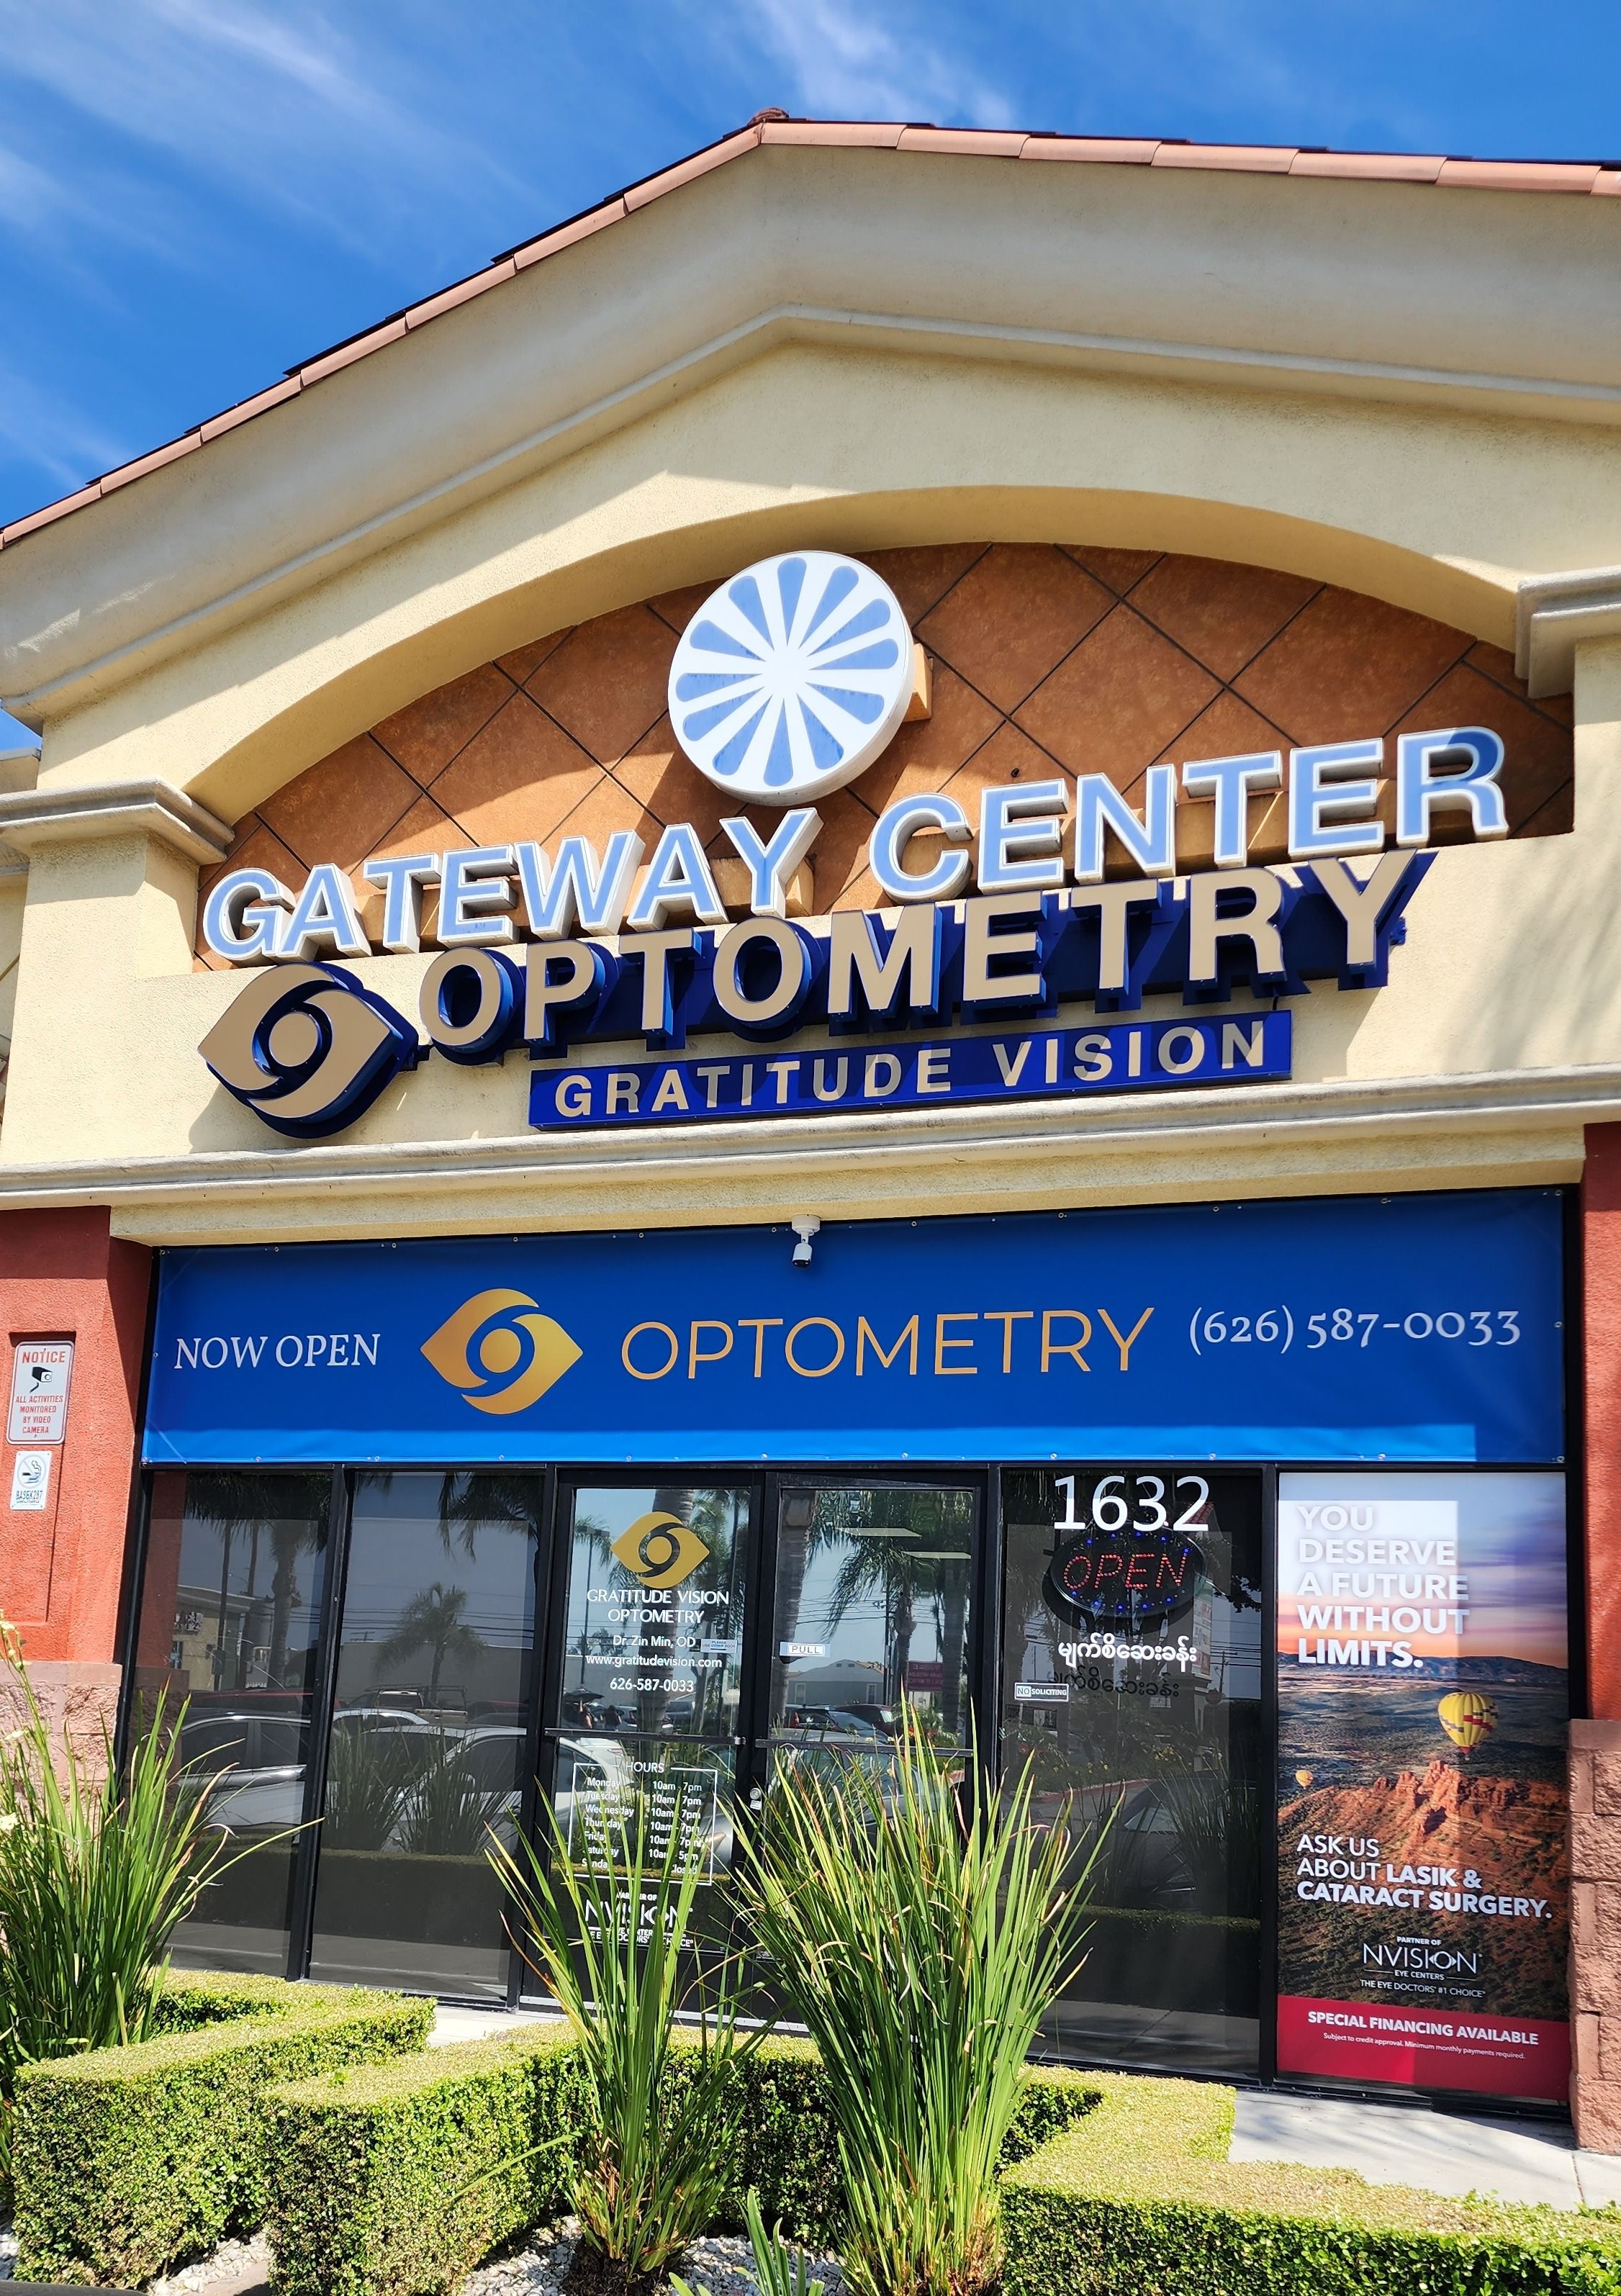 Gratitude Vision Optometry is located in Gateway Center at the corner of Francisquito and Punte Aves.